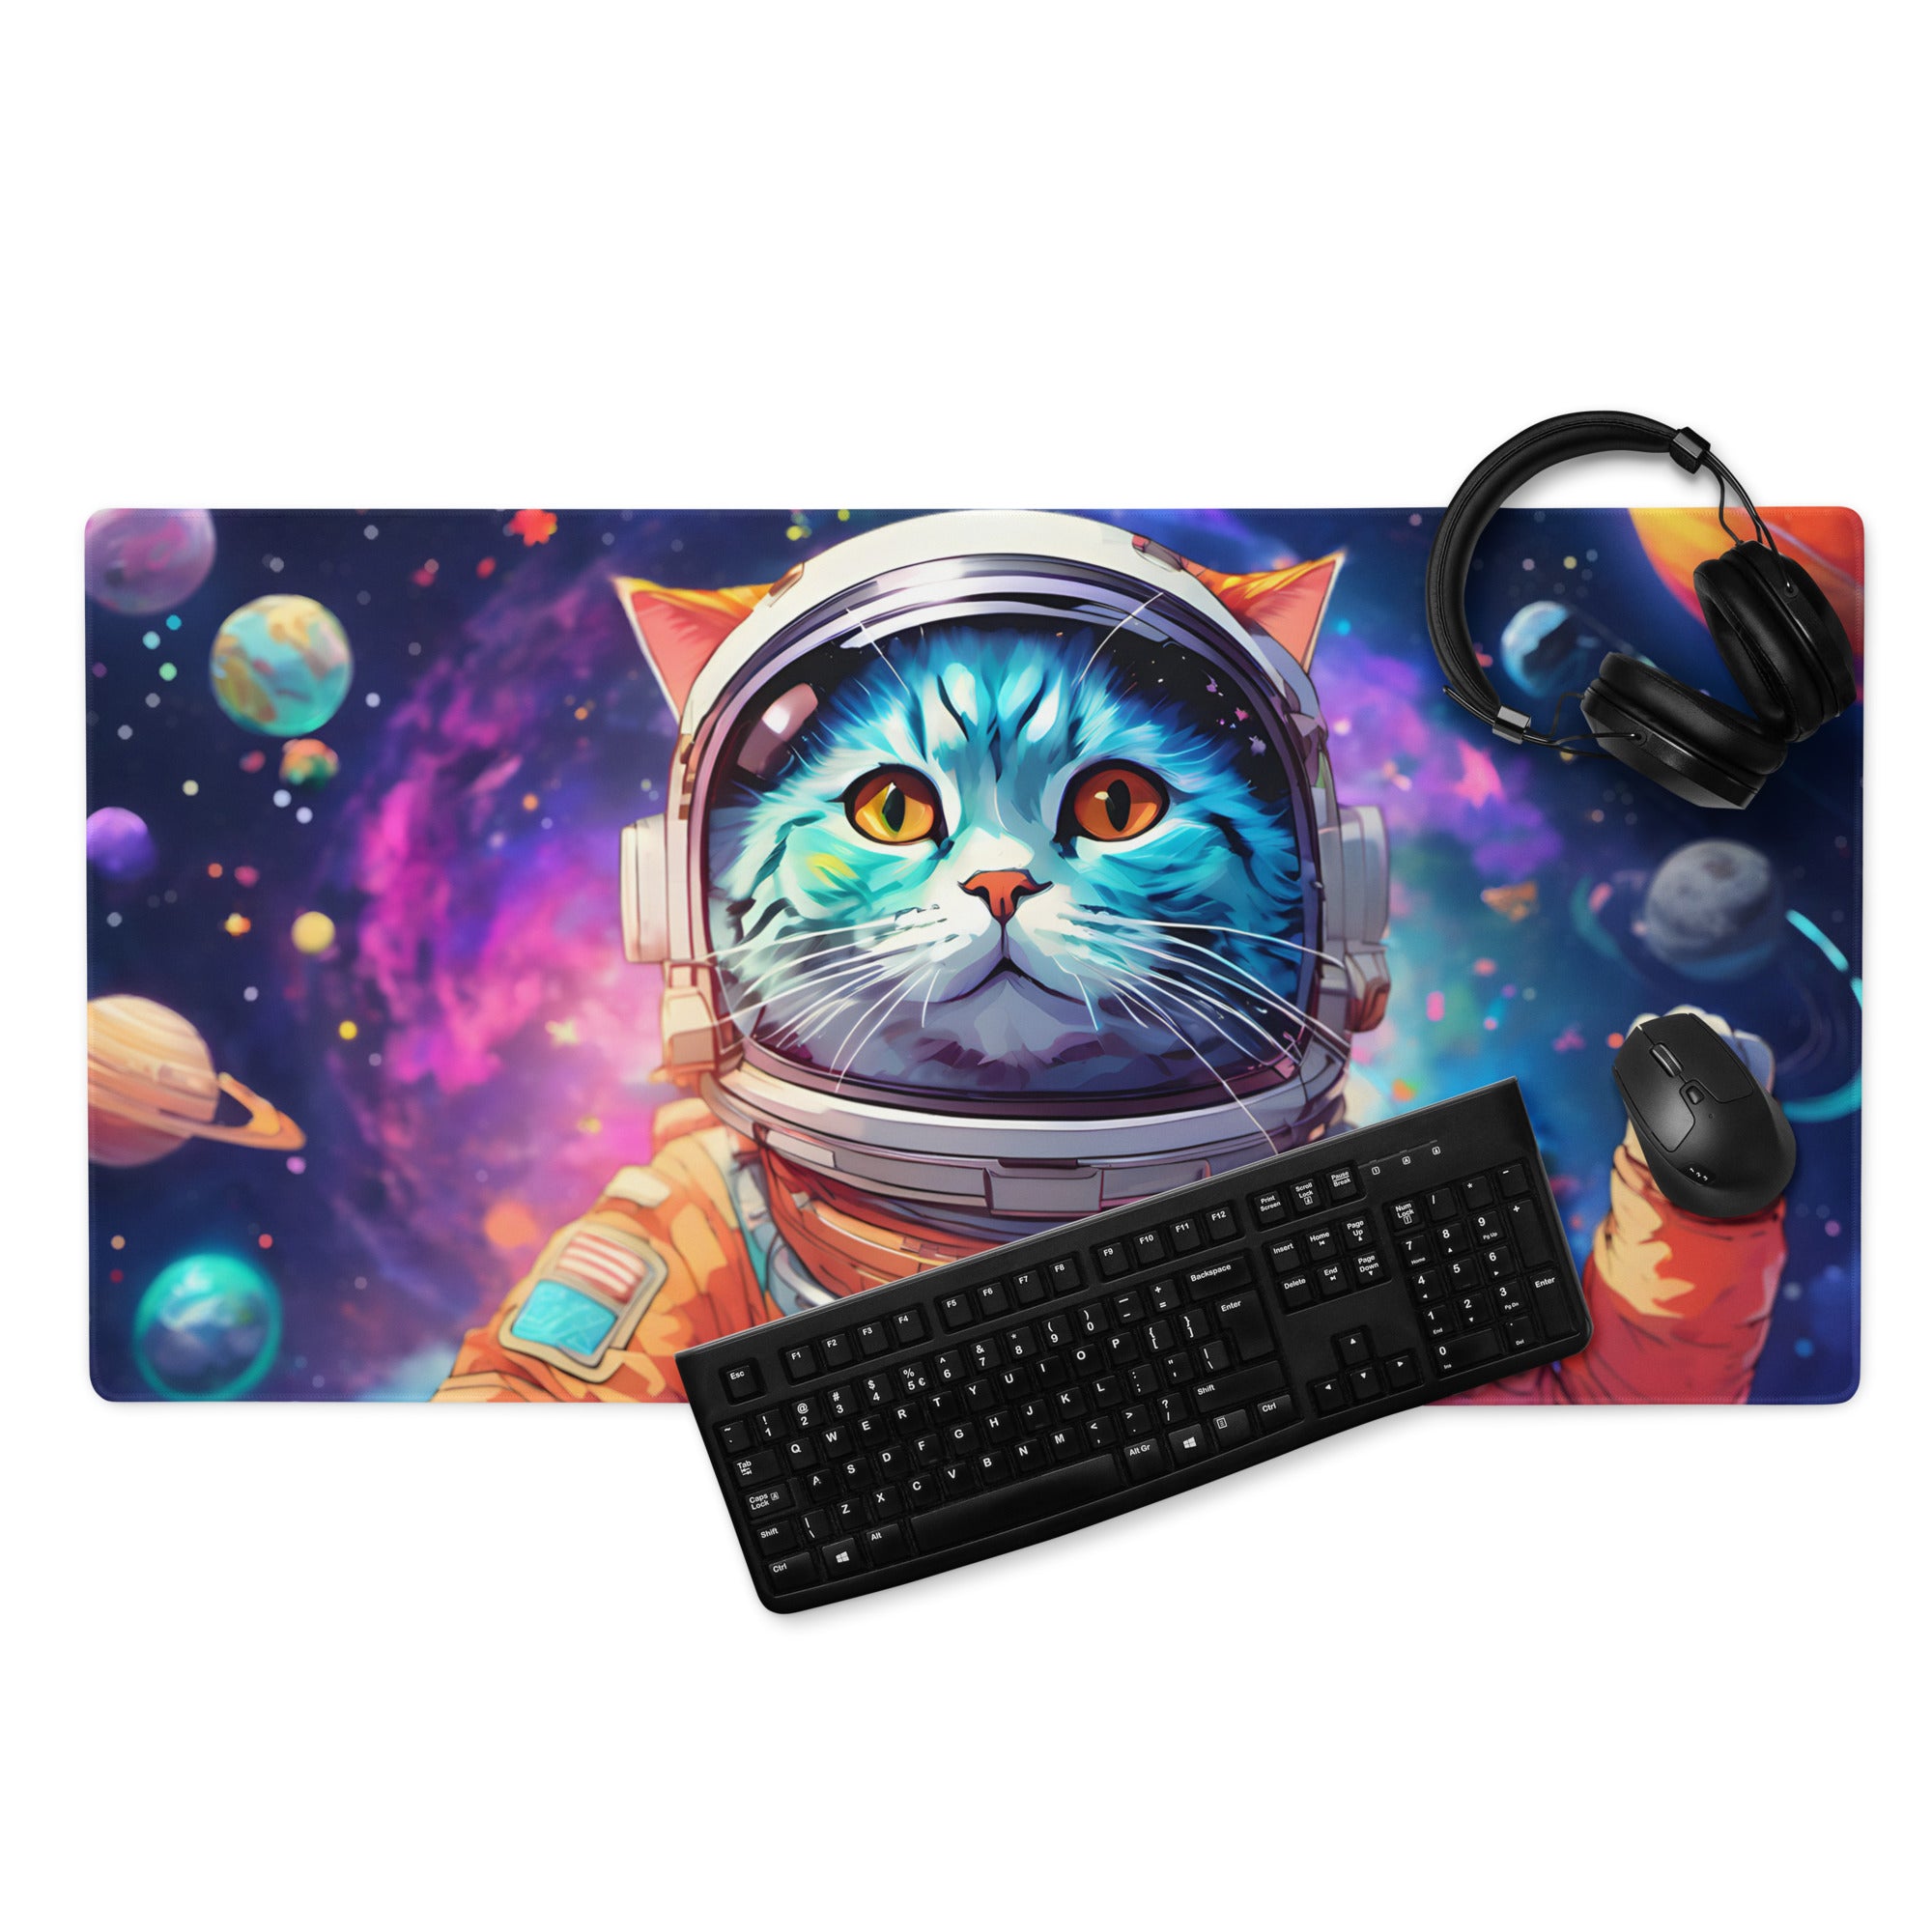 Deskmat | Space Cat Desk Mat SC-1 | Gaming Pad For Laptop Computer |  High Quality Mouse Pad For Keyboard